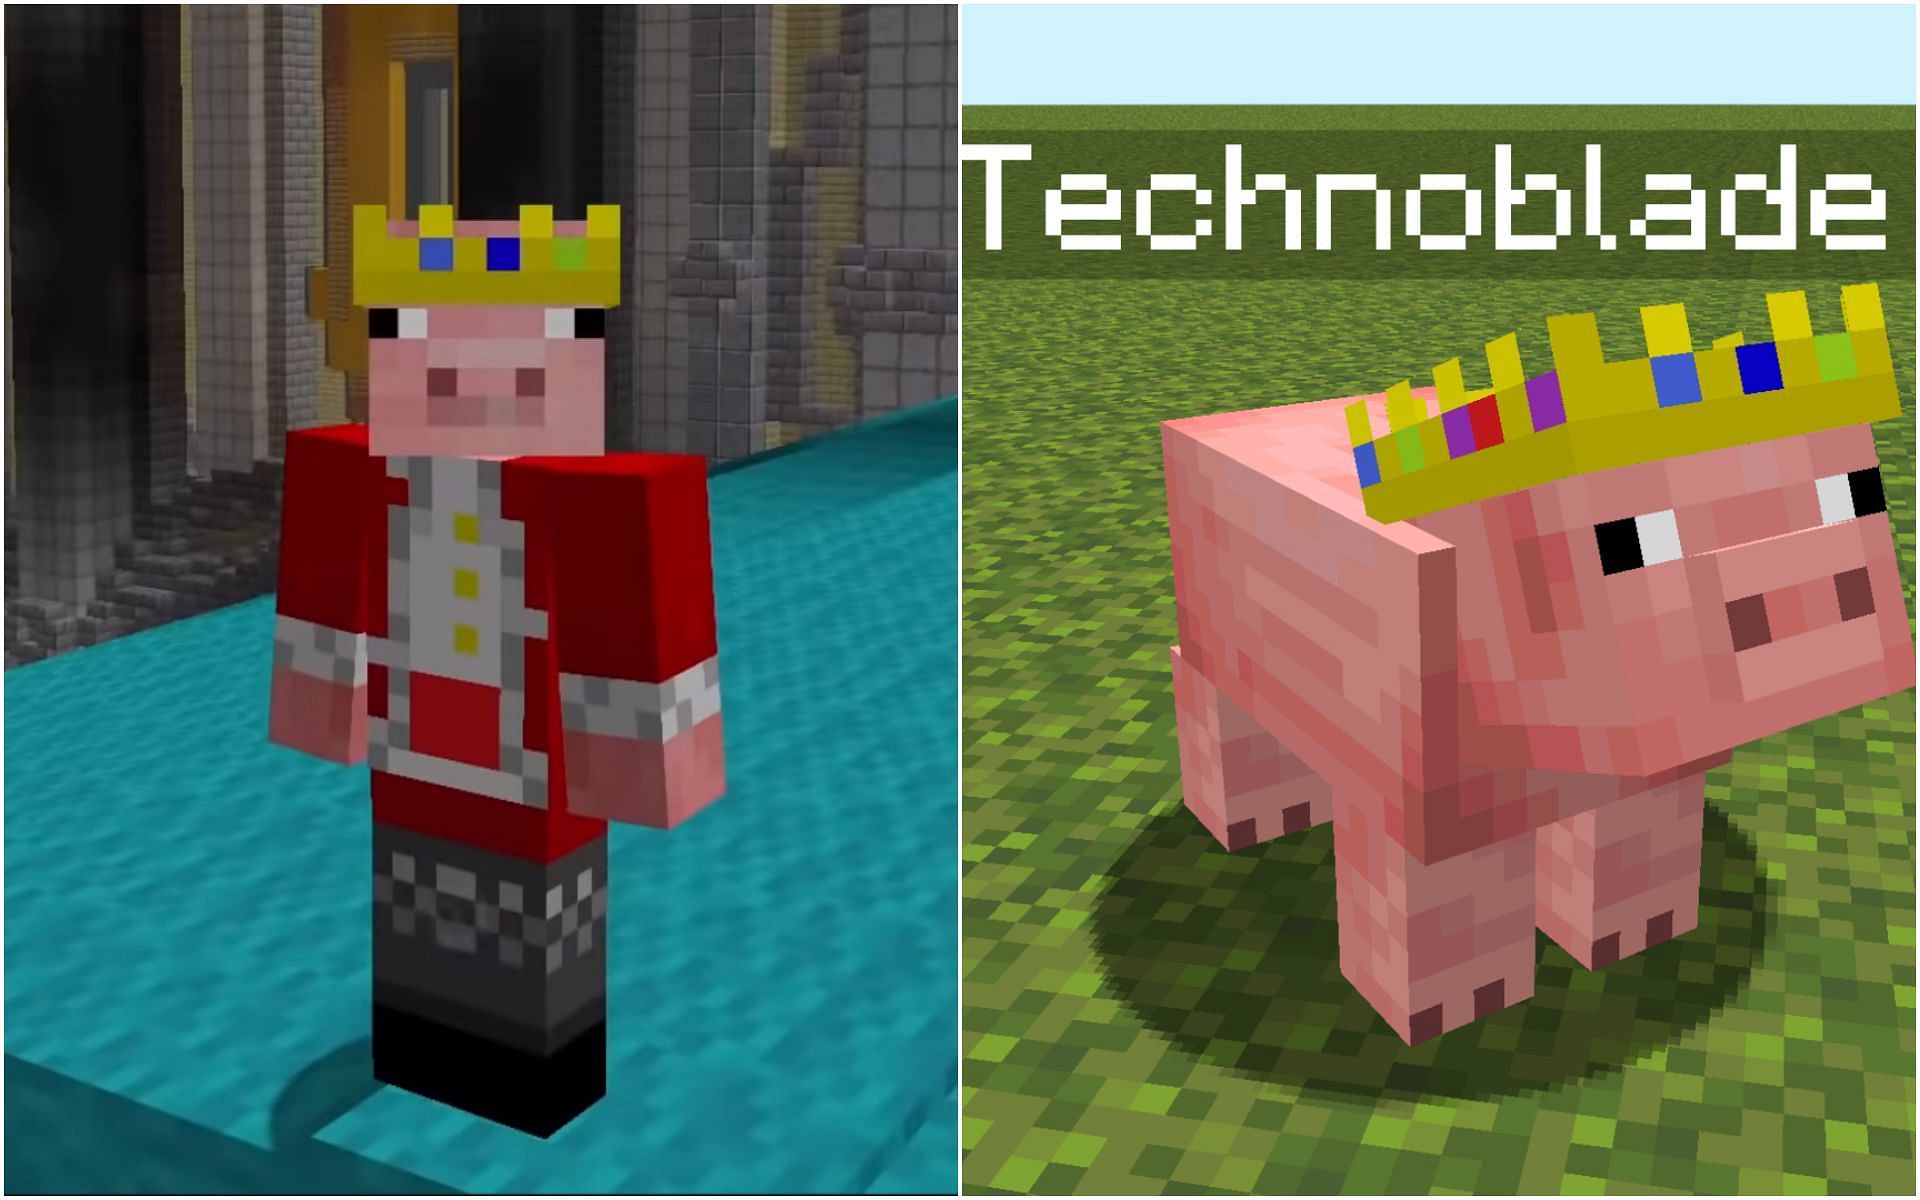 Mojang pays tribute to Technoblade on the Minecraft loading screen